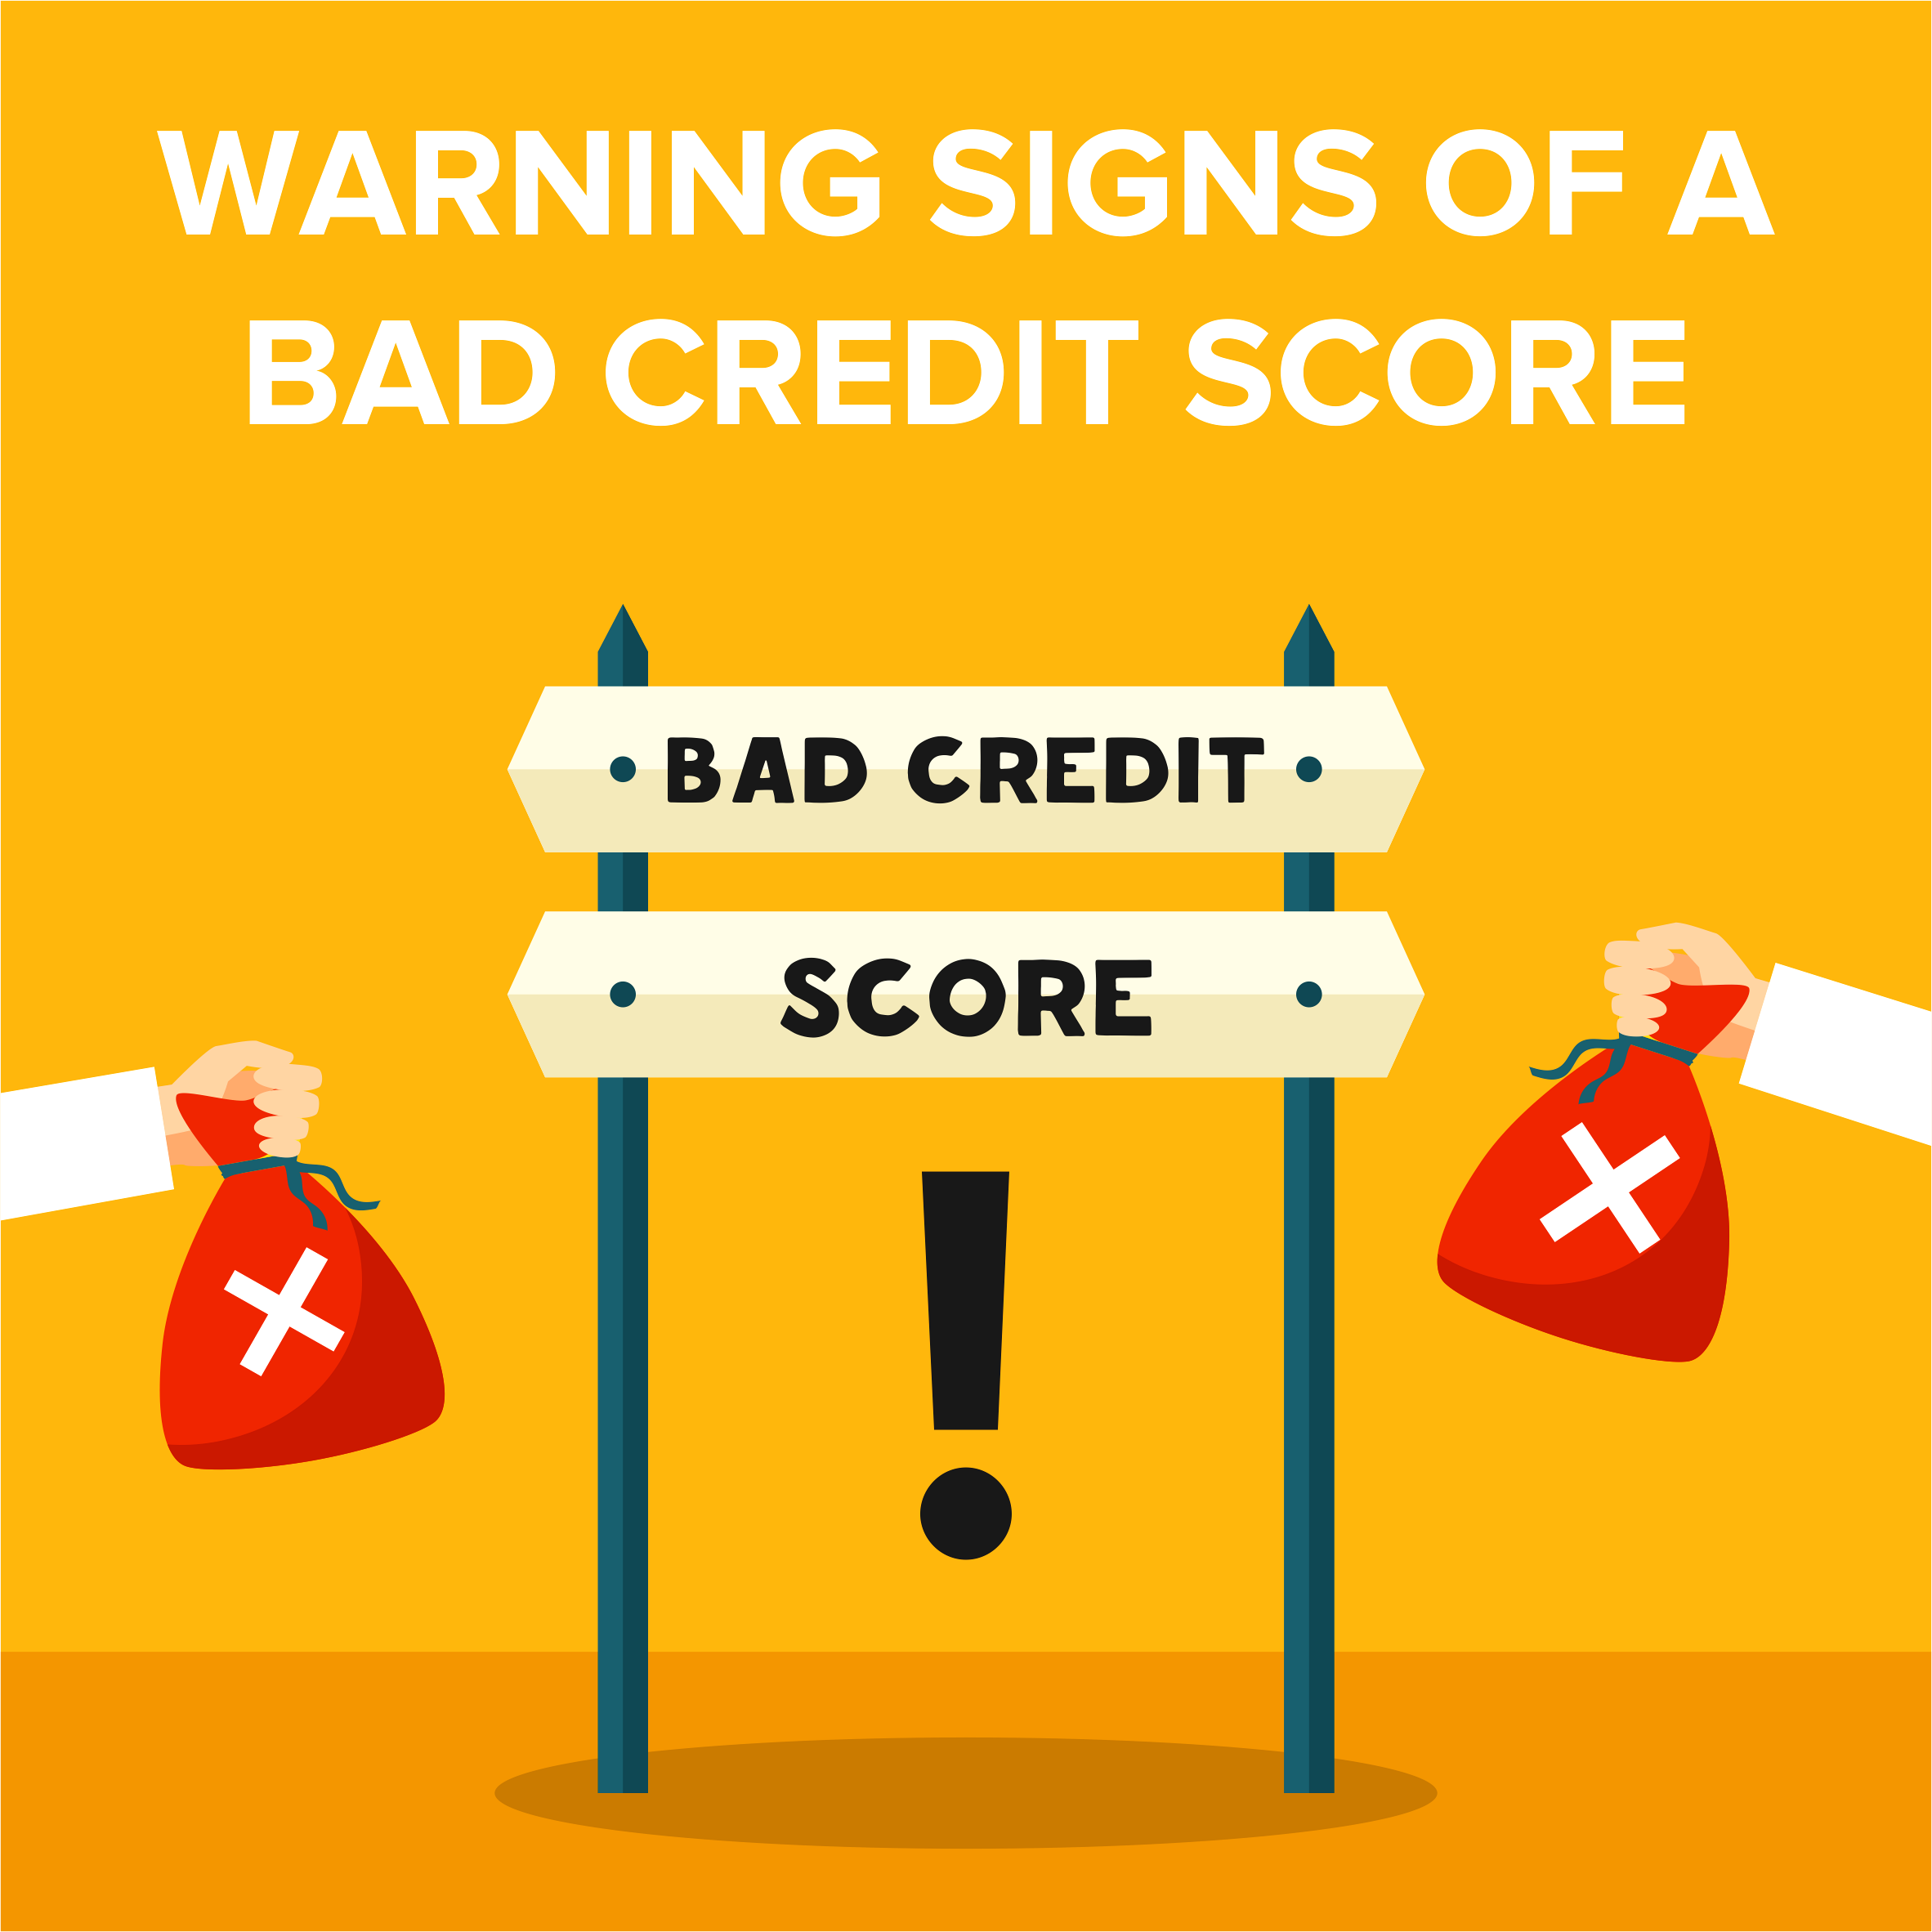 Warning Signs of a Bad Credit Score